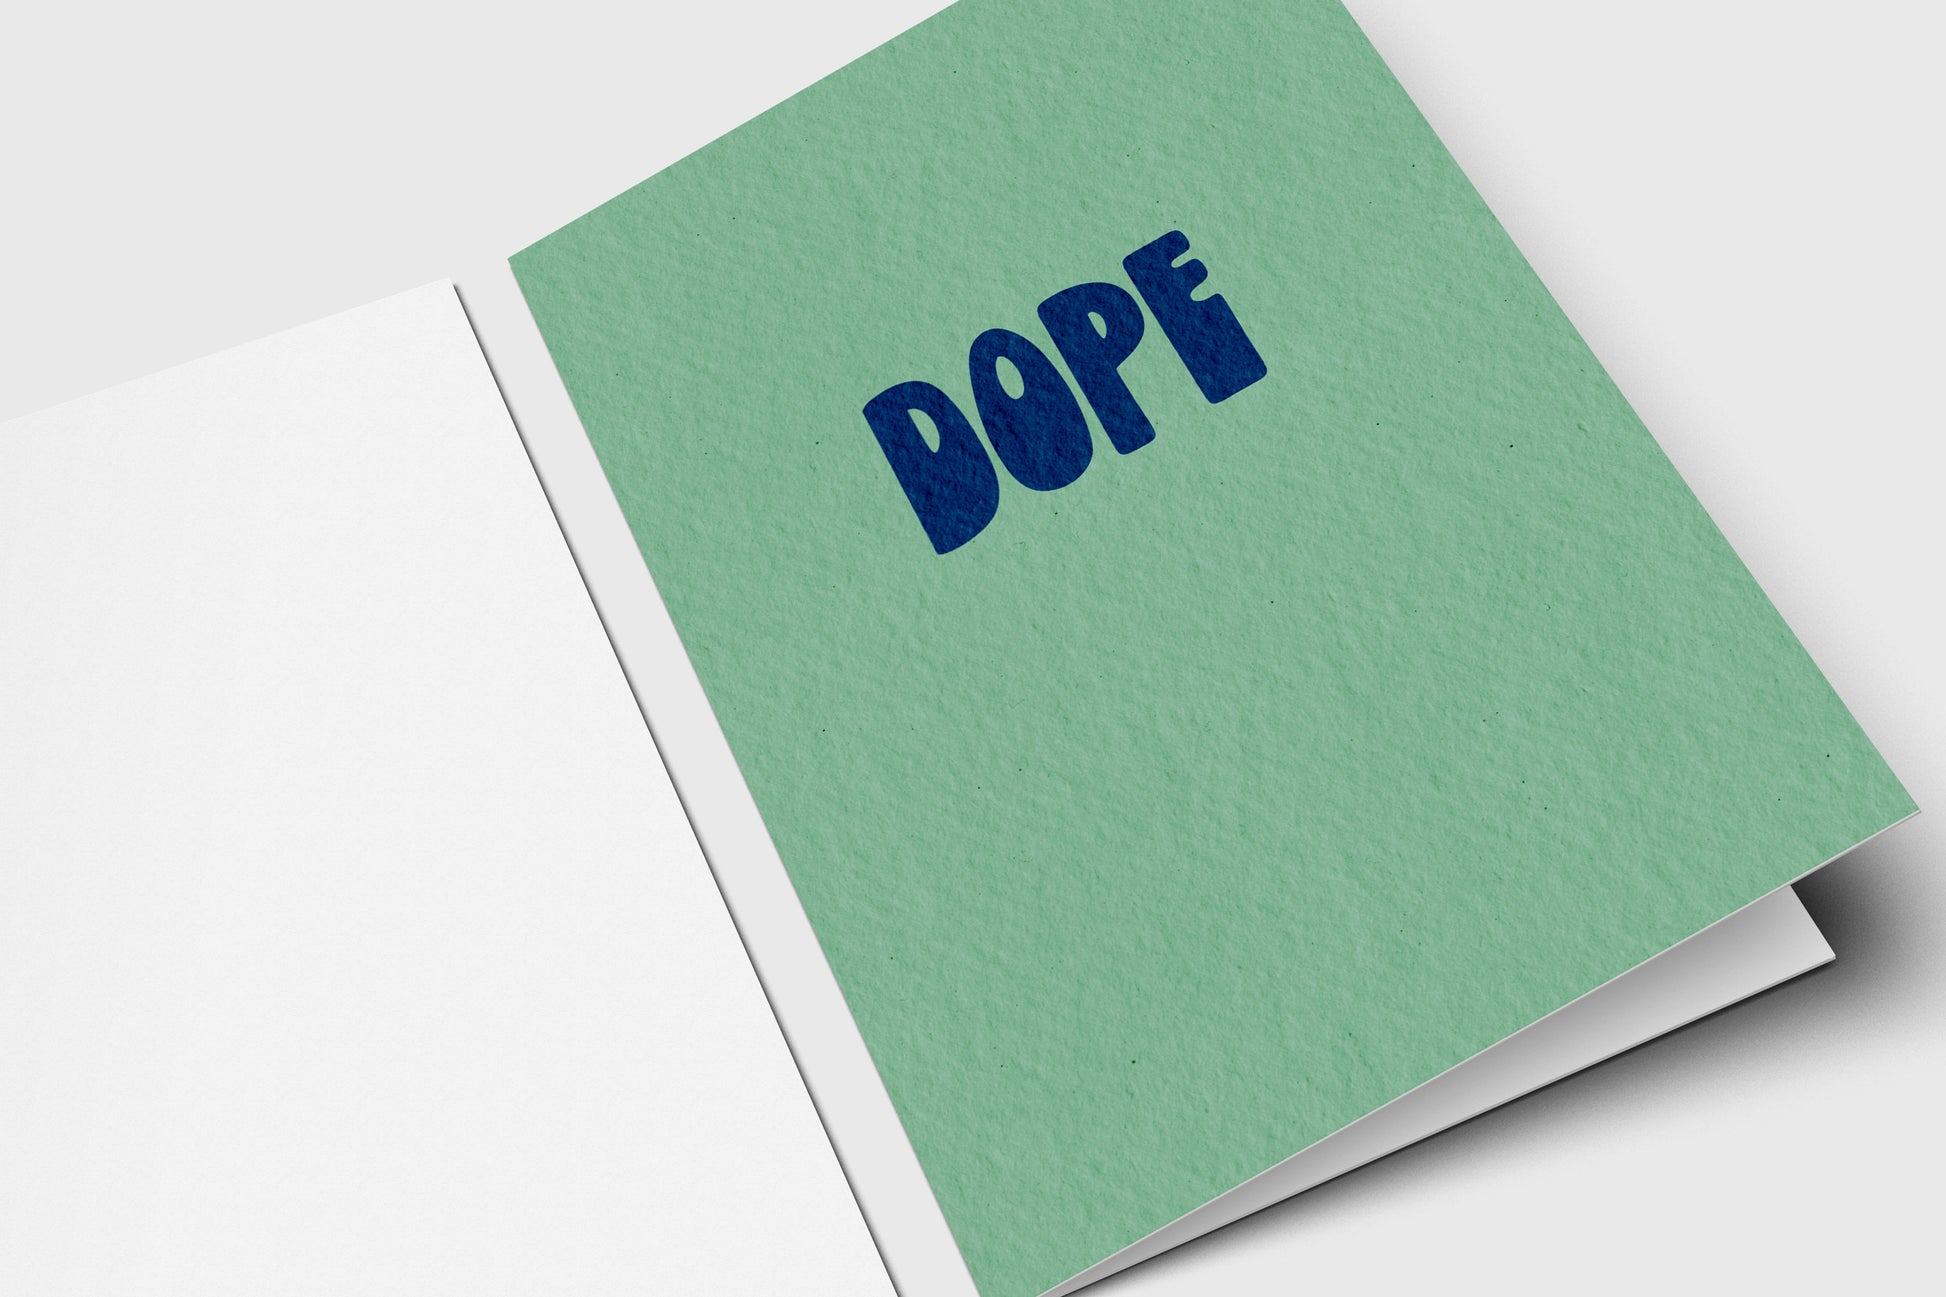 Dope Card - Hype Greeting Card - Congrats - Excited - Happy Birthday - Proud of You - Celebrate - Minimalist Greeting Card - Blank Inside